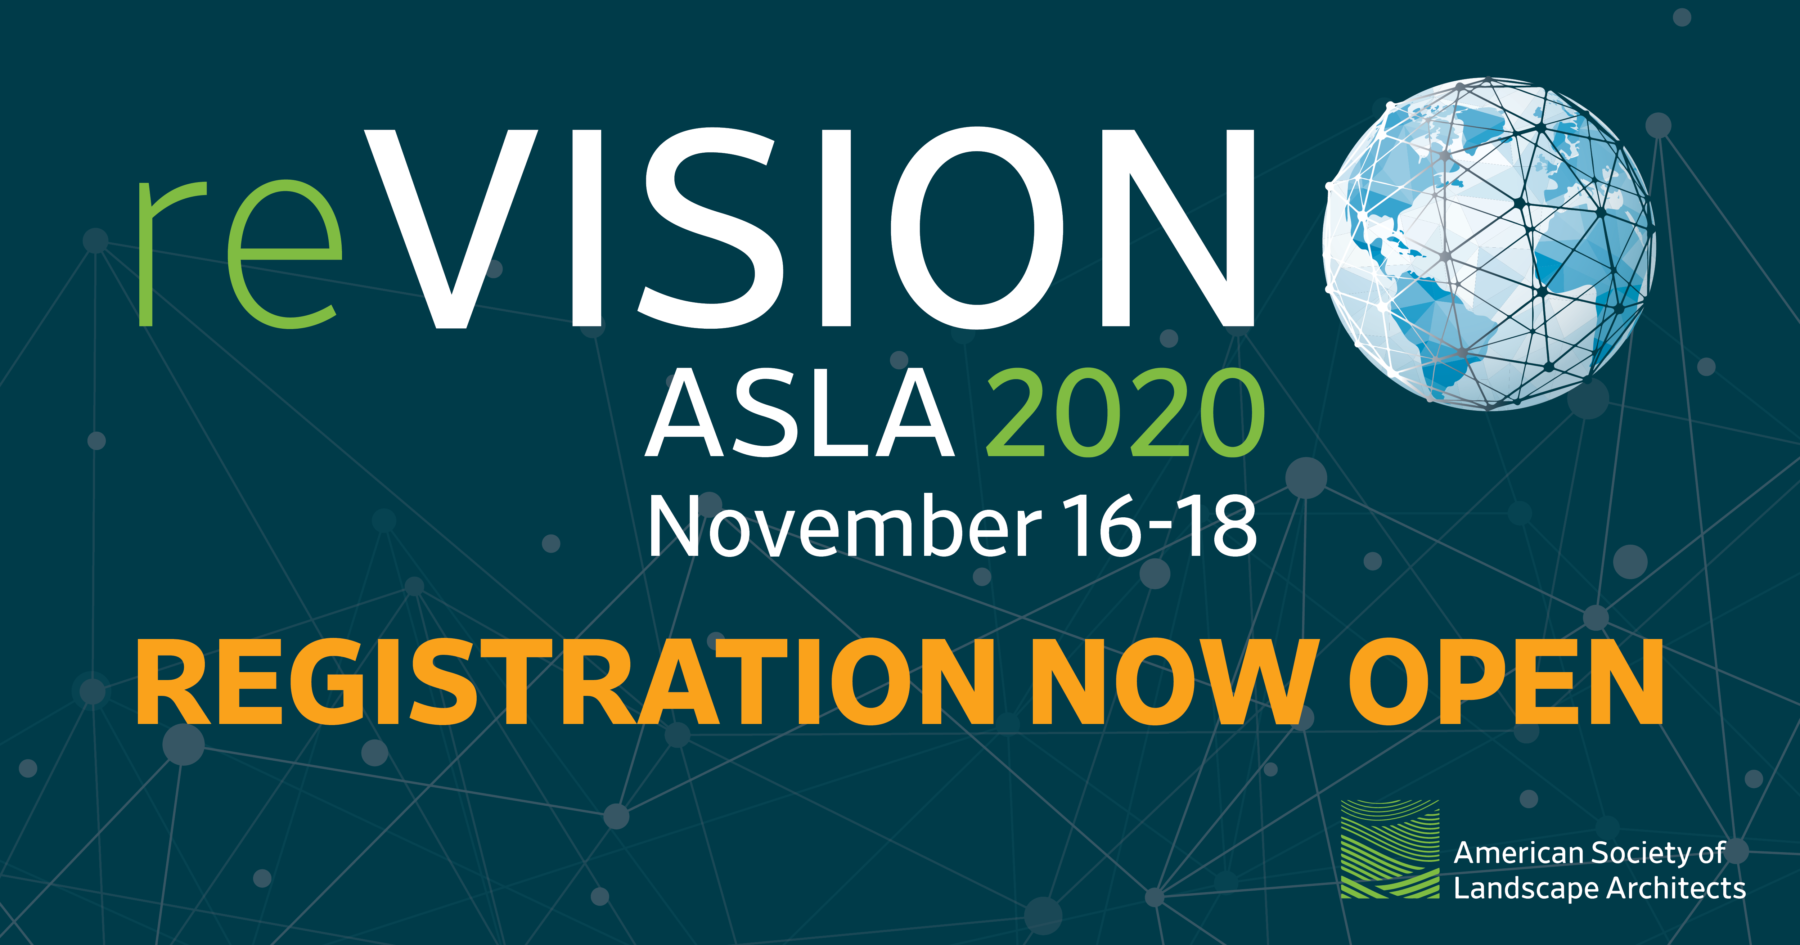 Poster for ASLA 2020 reVISION conference encouraging people to register